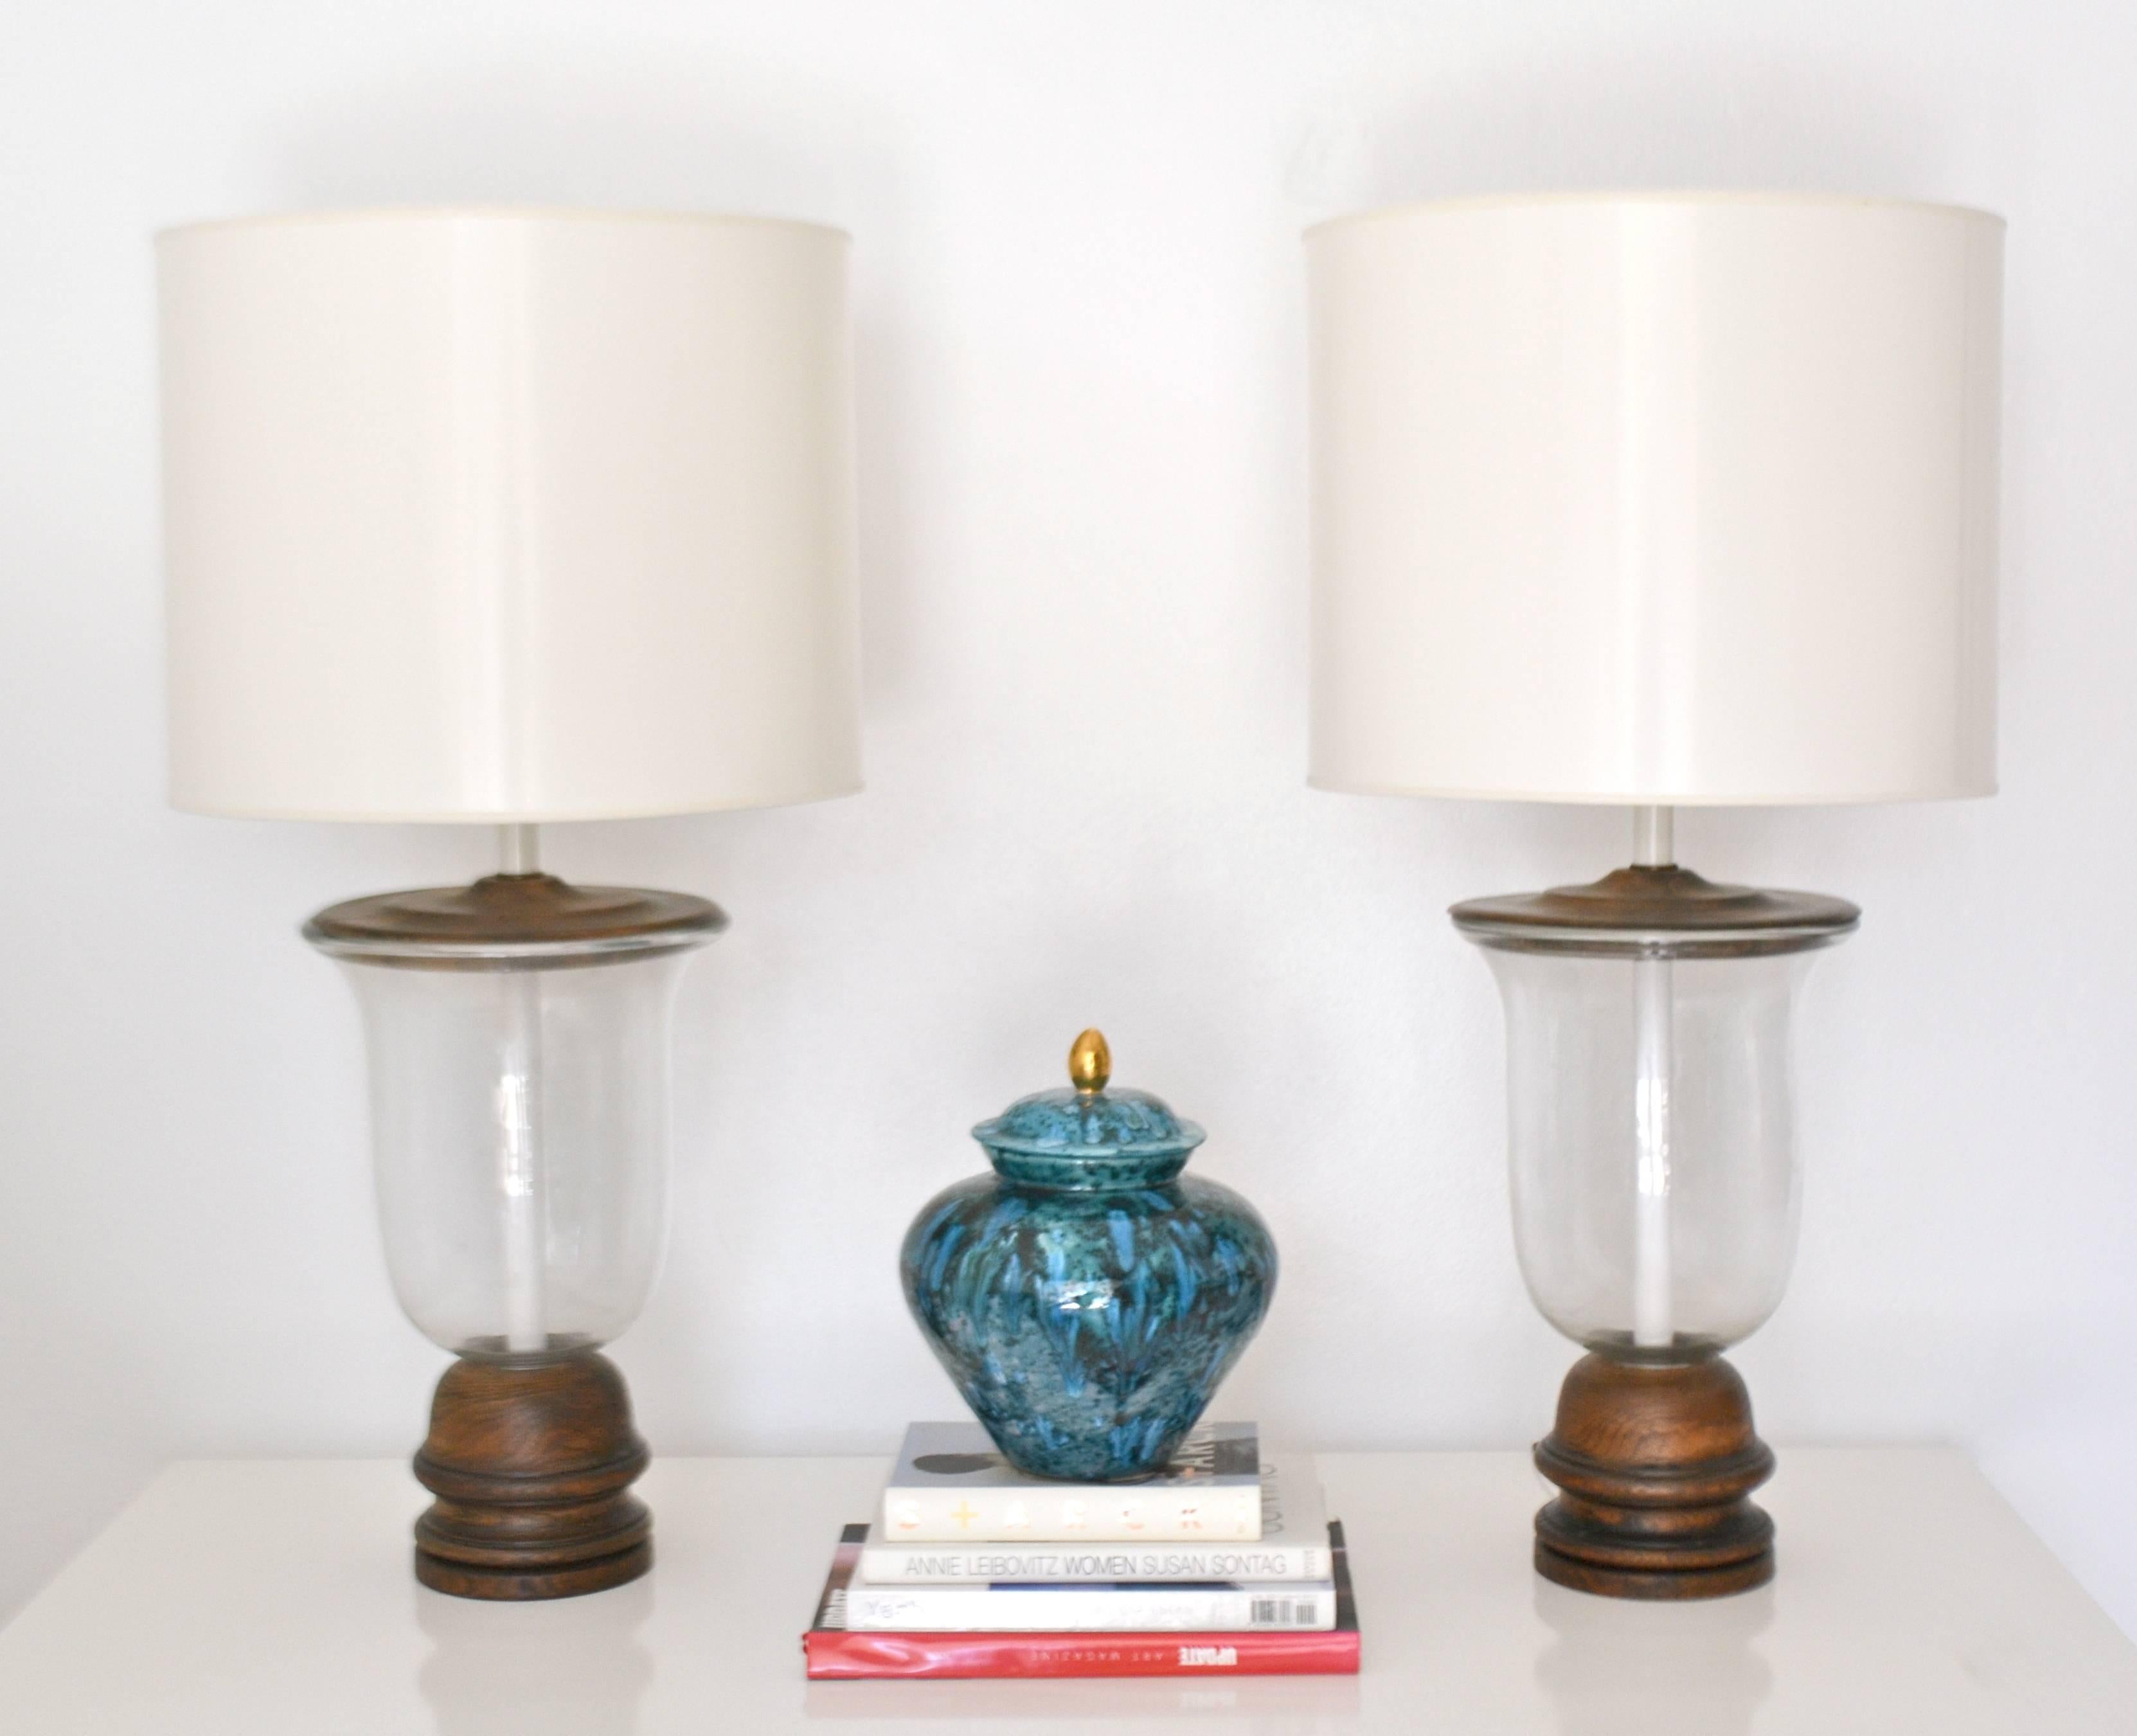 Stunning pair of Mid-Century blown glass bell jar form table lamps, circa 1950s-1960s. These highly decorative clear blown glass lamps are mounted on hand-turned oak bases and rewired with antique brass adjustable double cluster fittings. Shades not